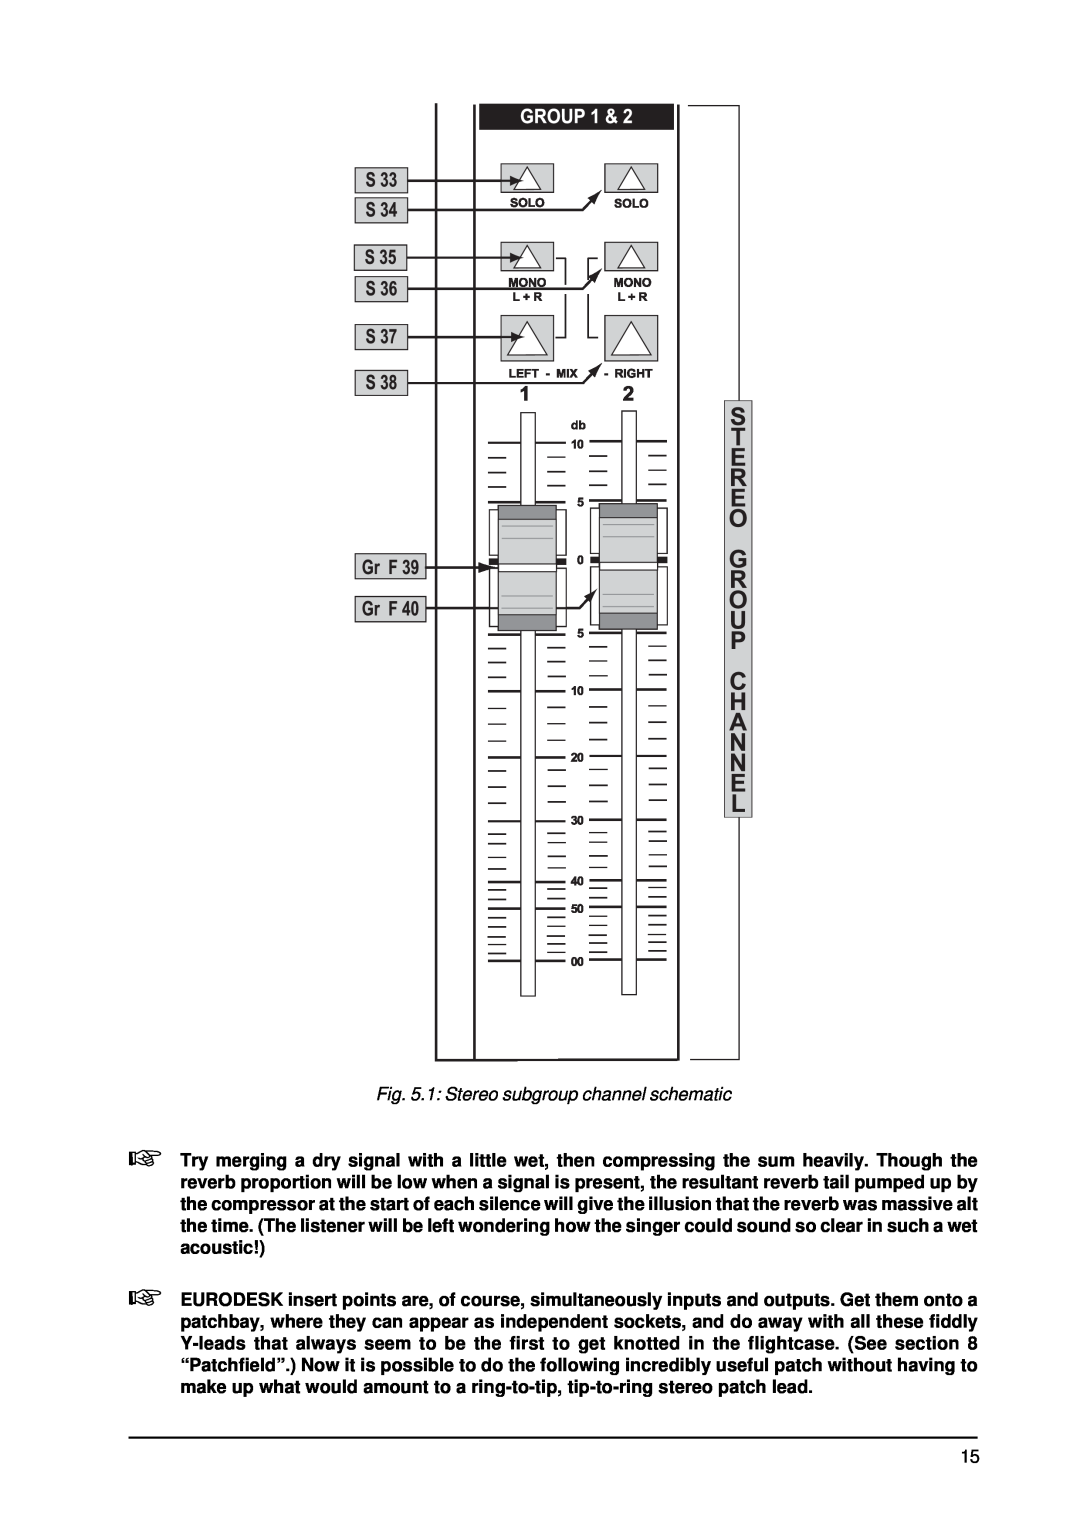 Behringer MX9000 user manual 1 Stereo subgroup channel schematic 